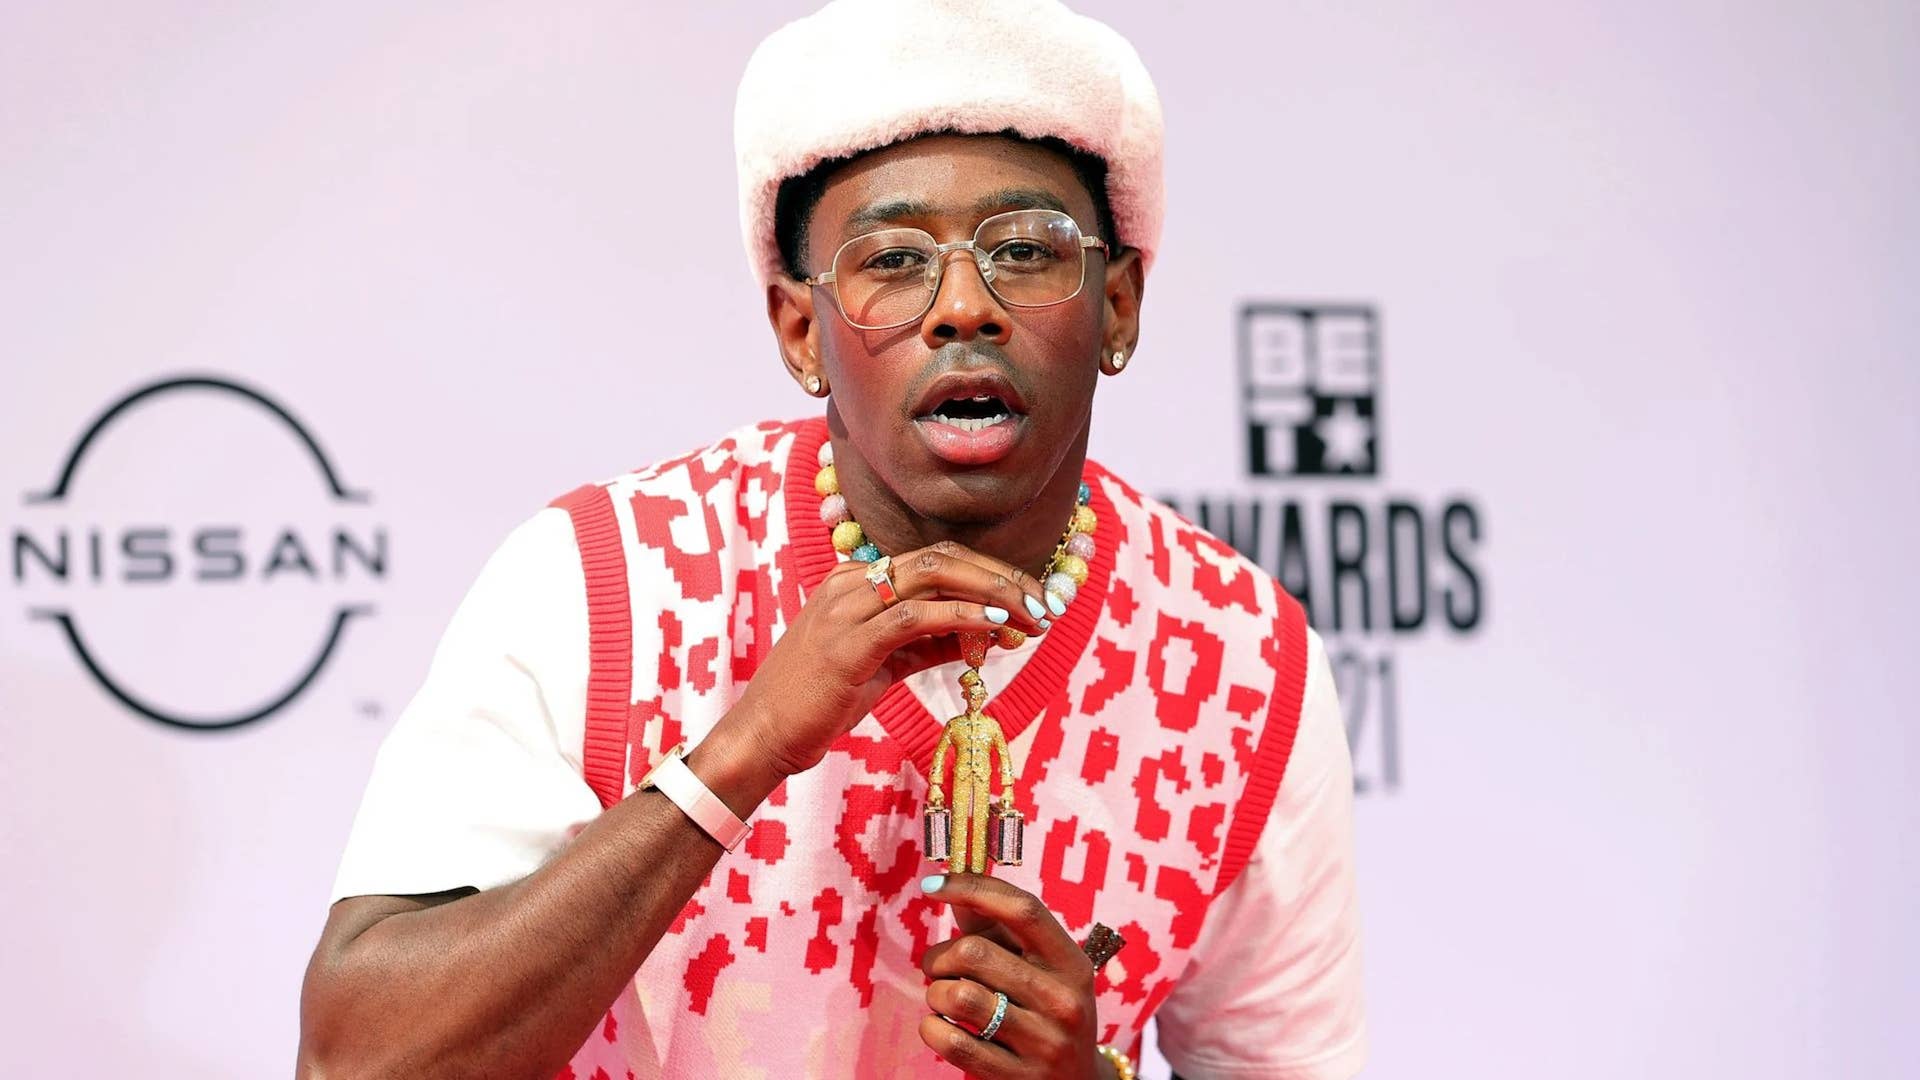 Tyler The Creator Holding Up Chain